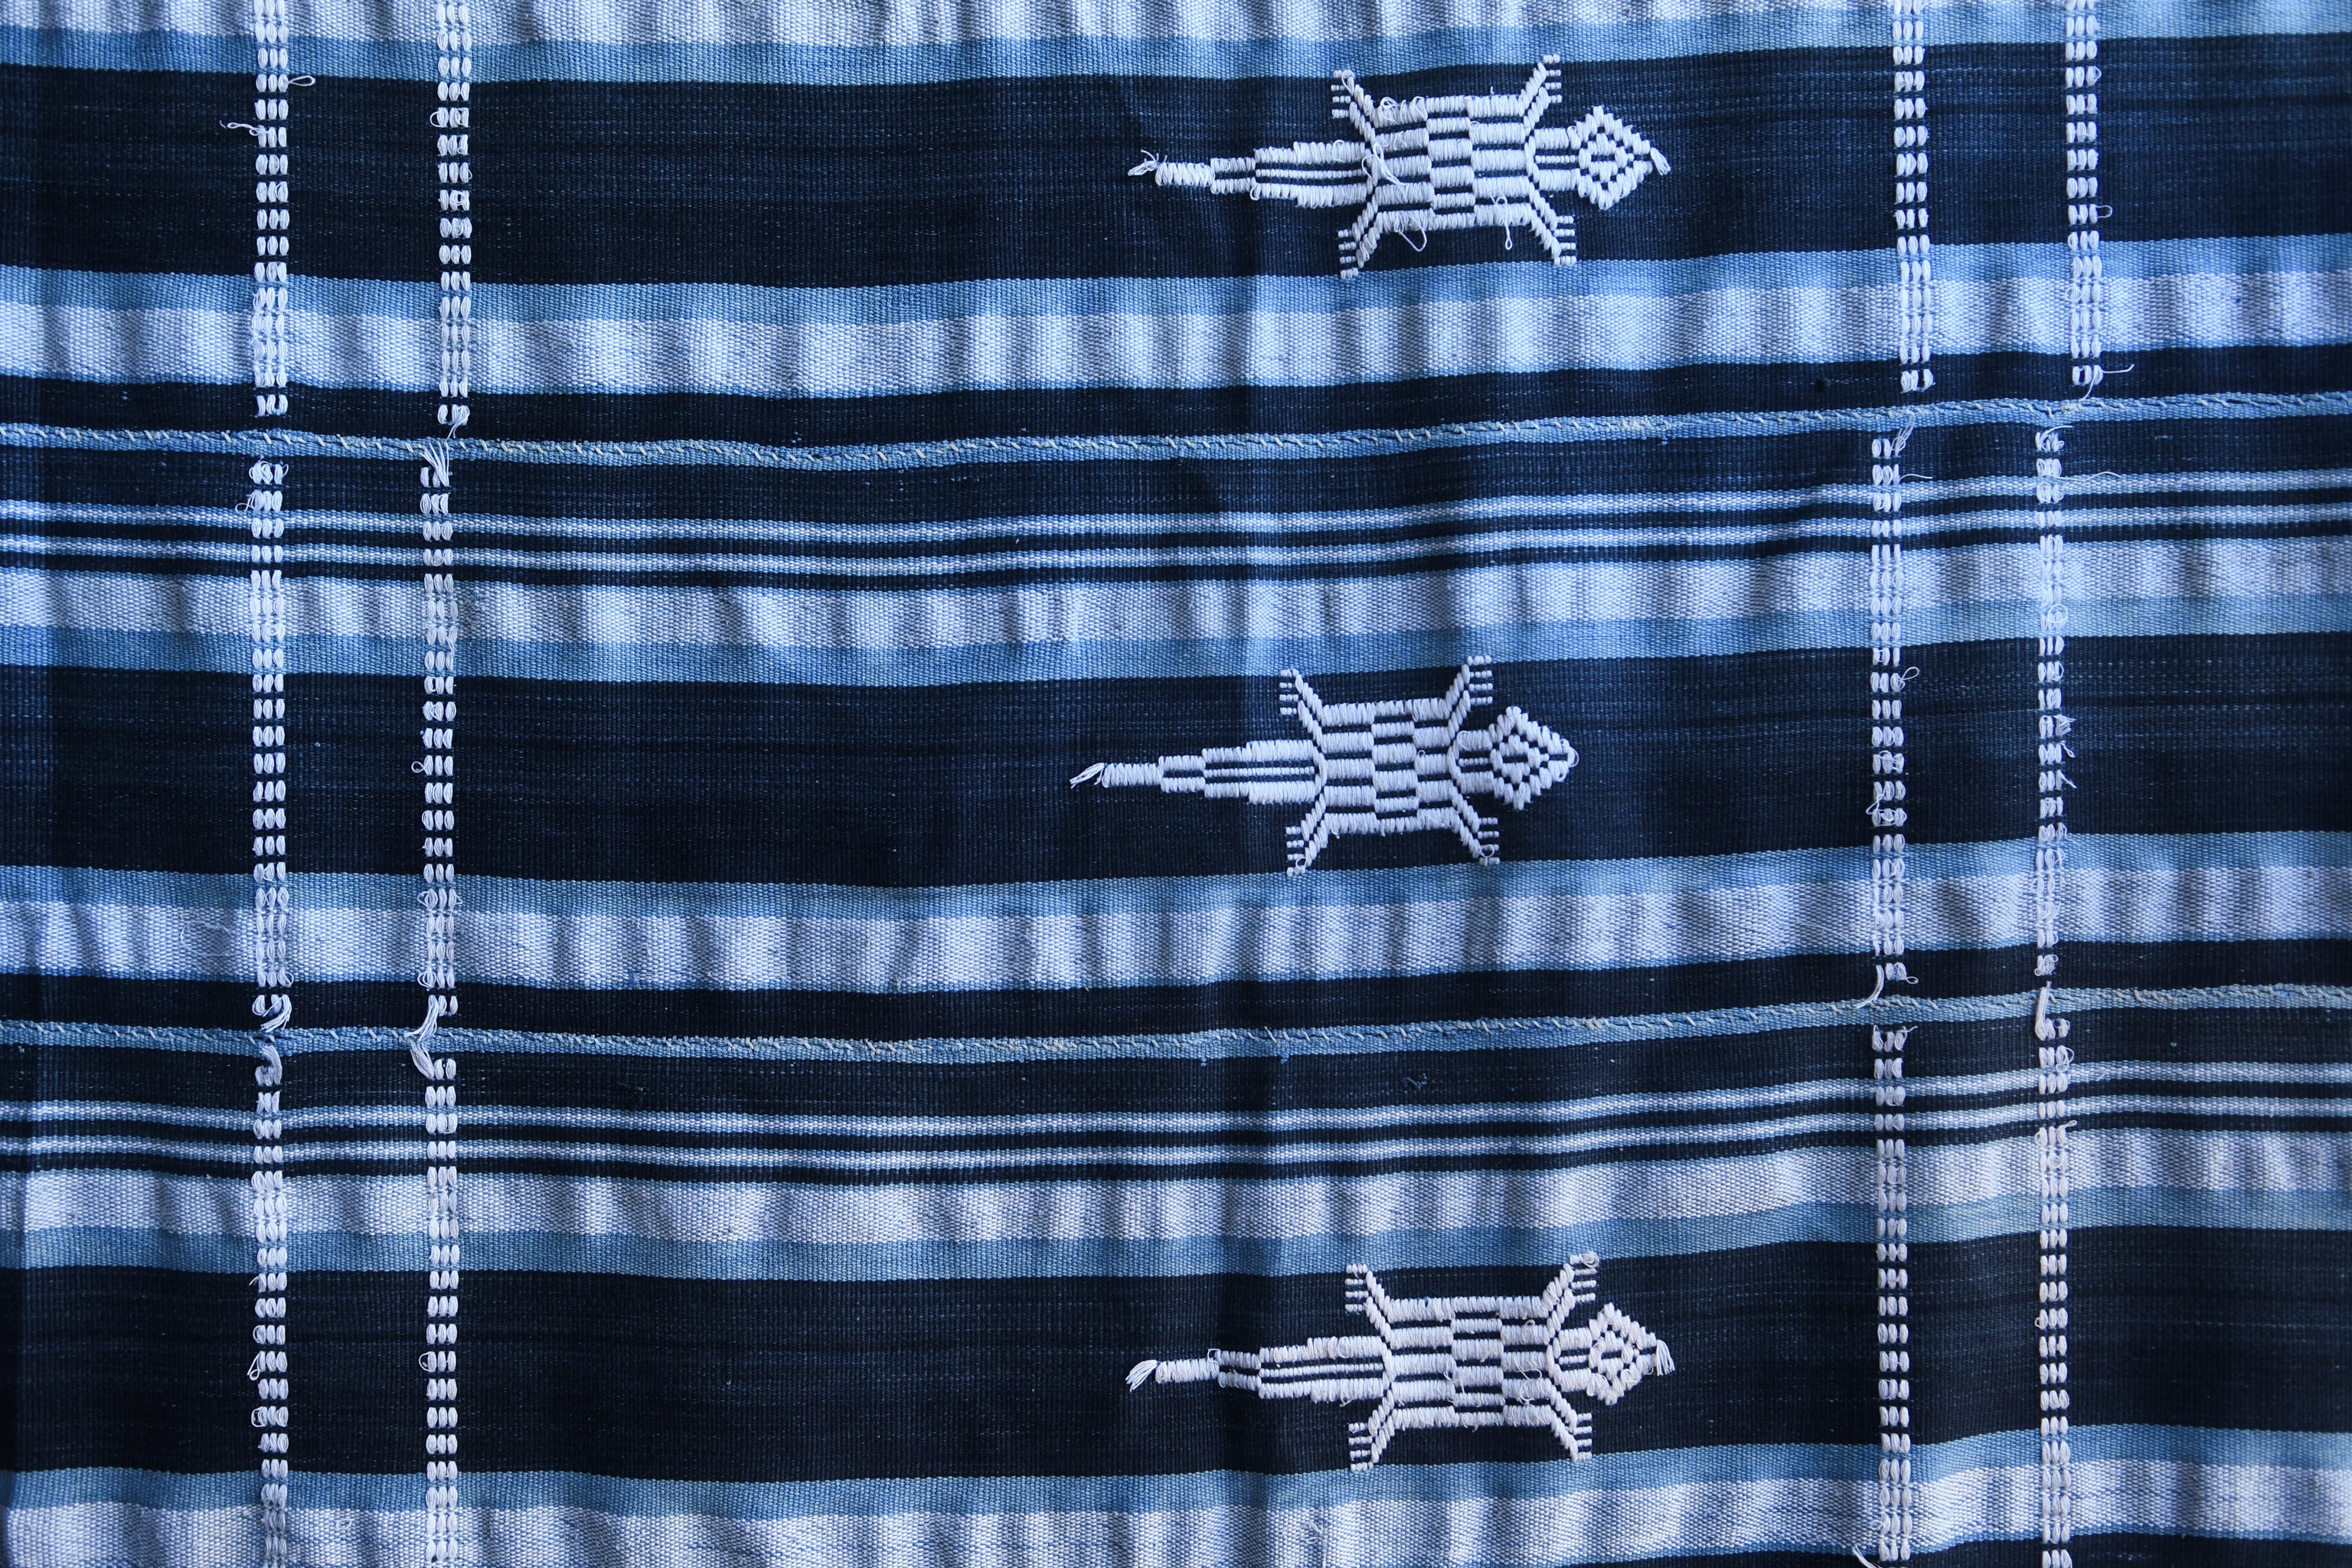 Handcrafted Textiles - African Art - Woven Cotton - Used - Home Decor - African Plural Art - Hand Dyed  African Indigo, Stripe Woven Embroidered Fabric, Blue White Cotton Mudcloth, Home Decor Tapestry, Textile Blanket